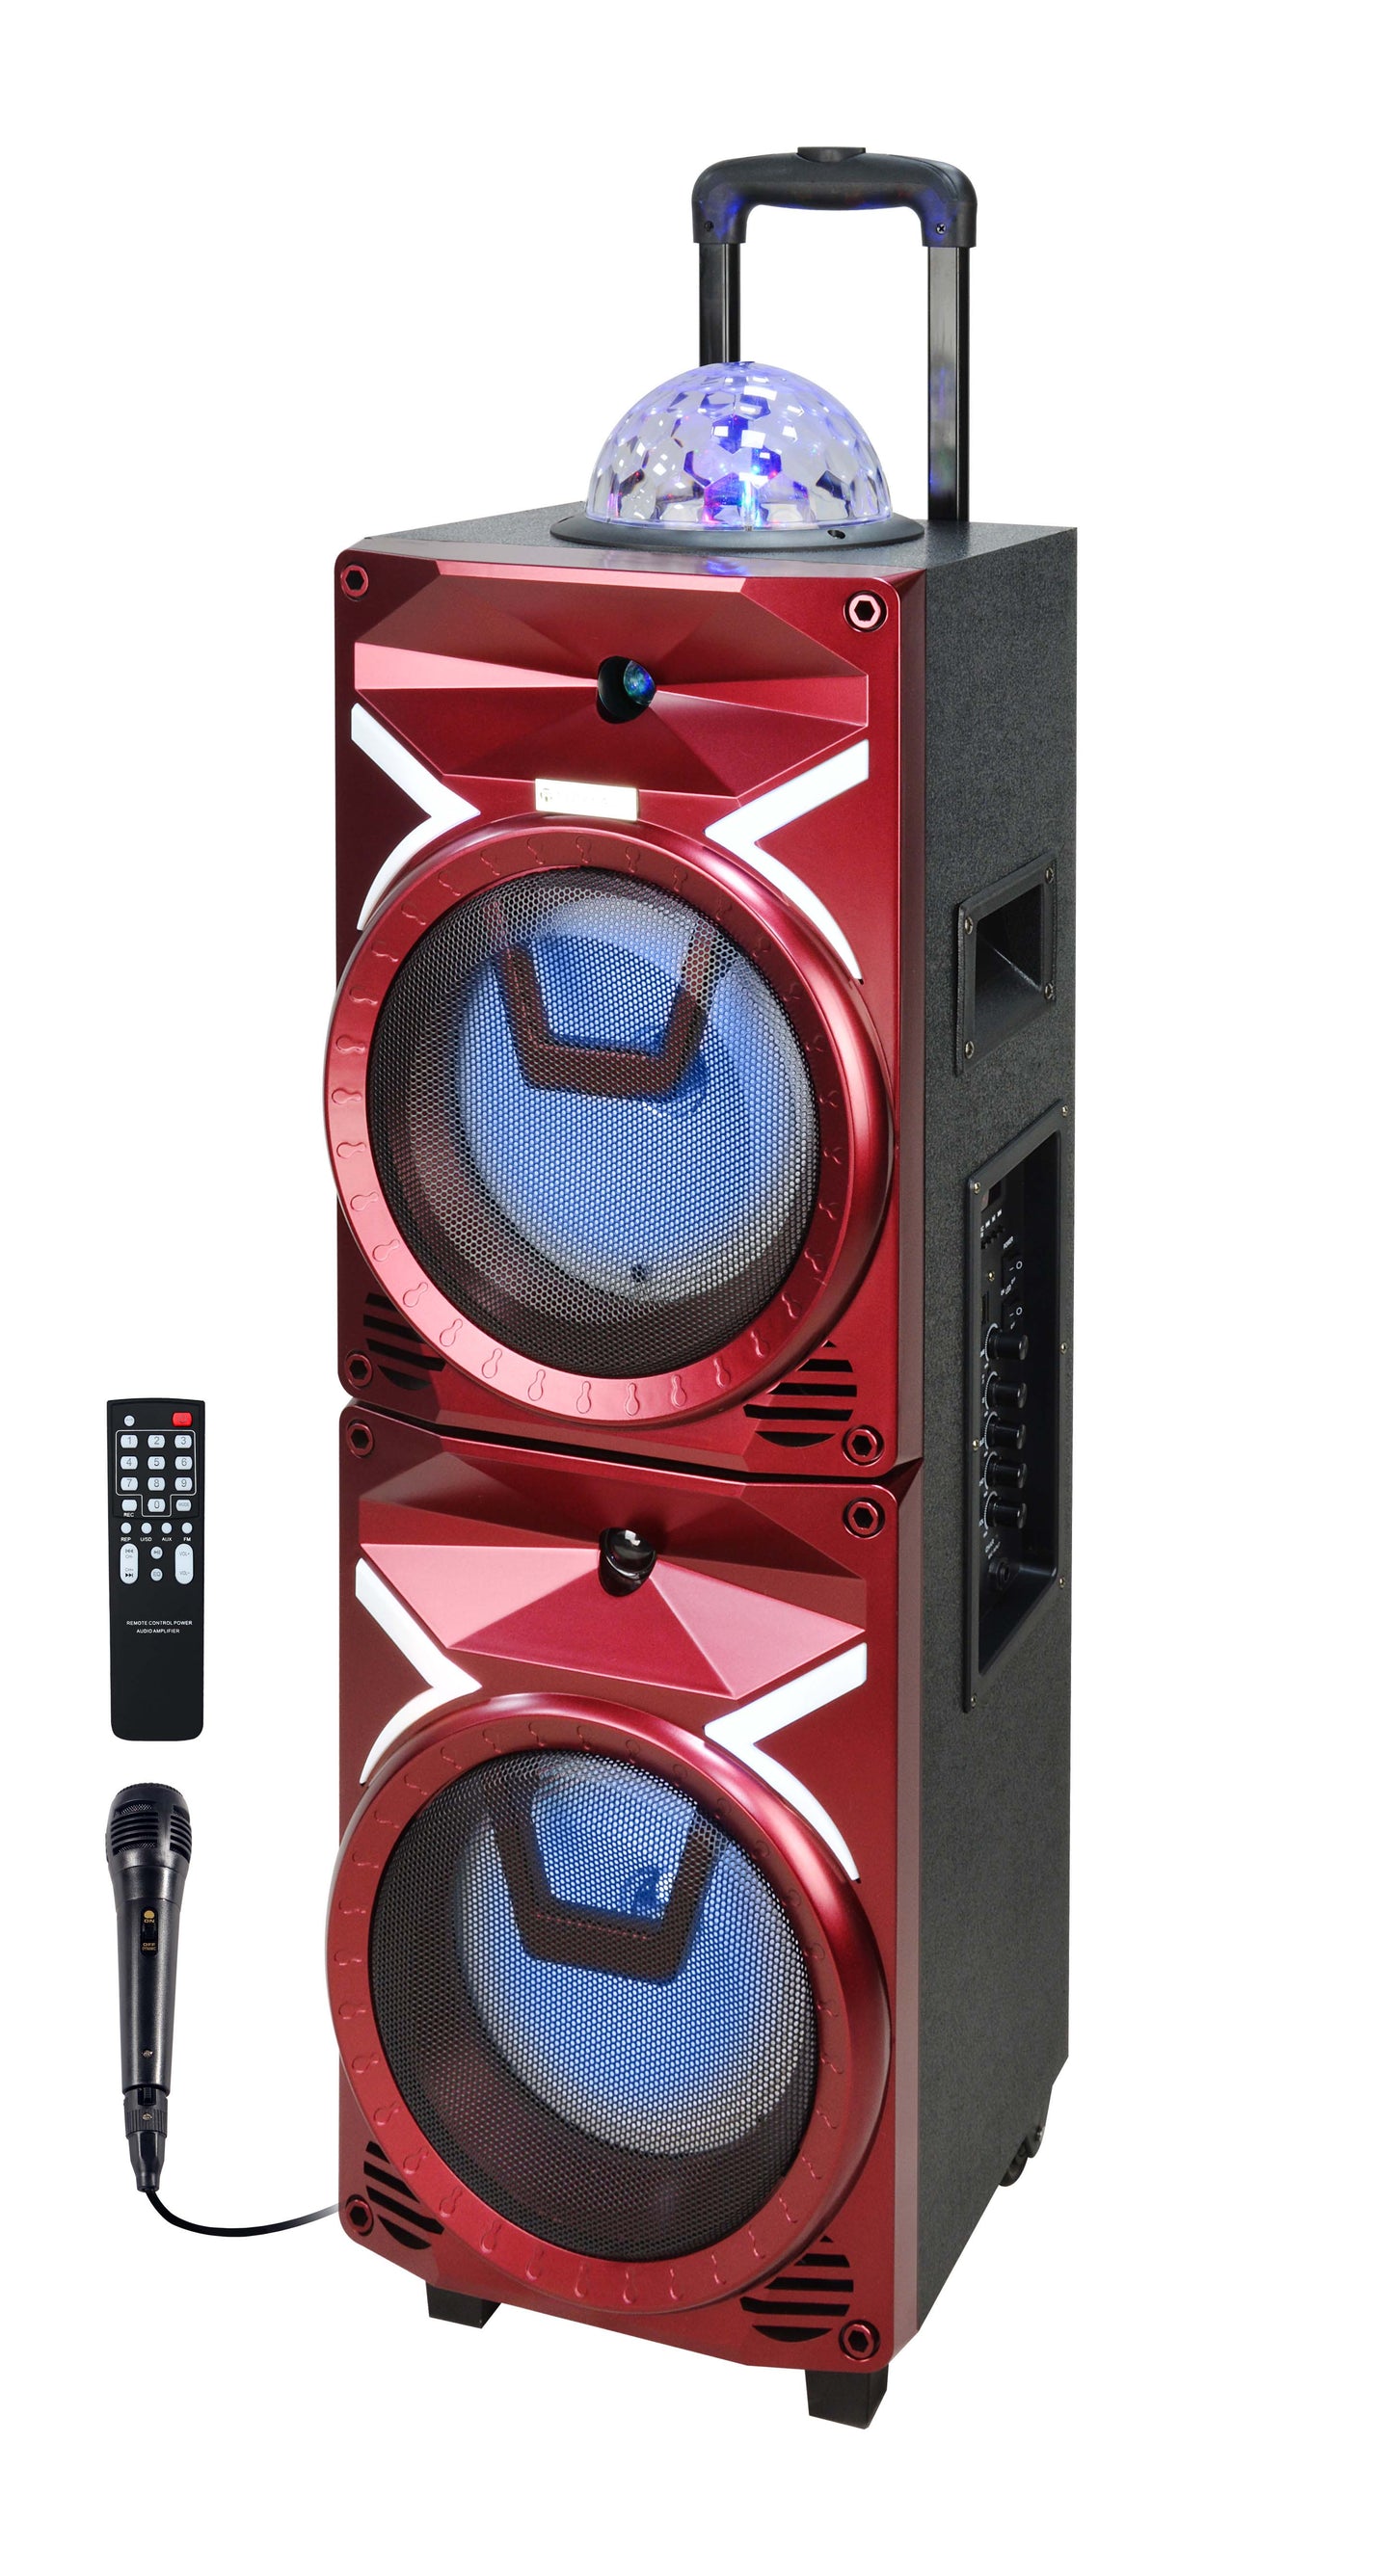 Fully Amplified Portable 4500 Watts Peak Power 2x8” Speaker with led light